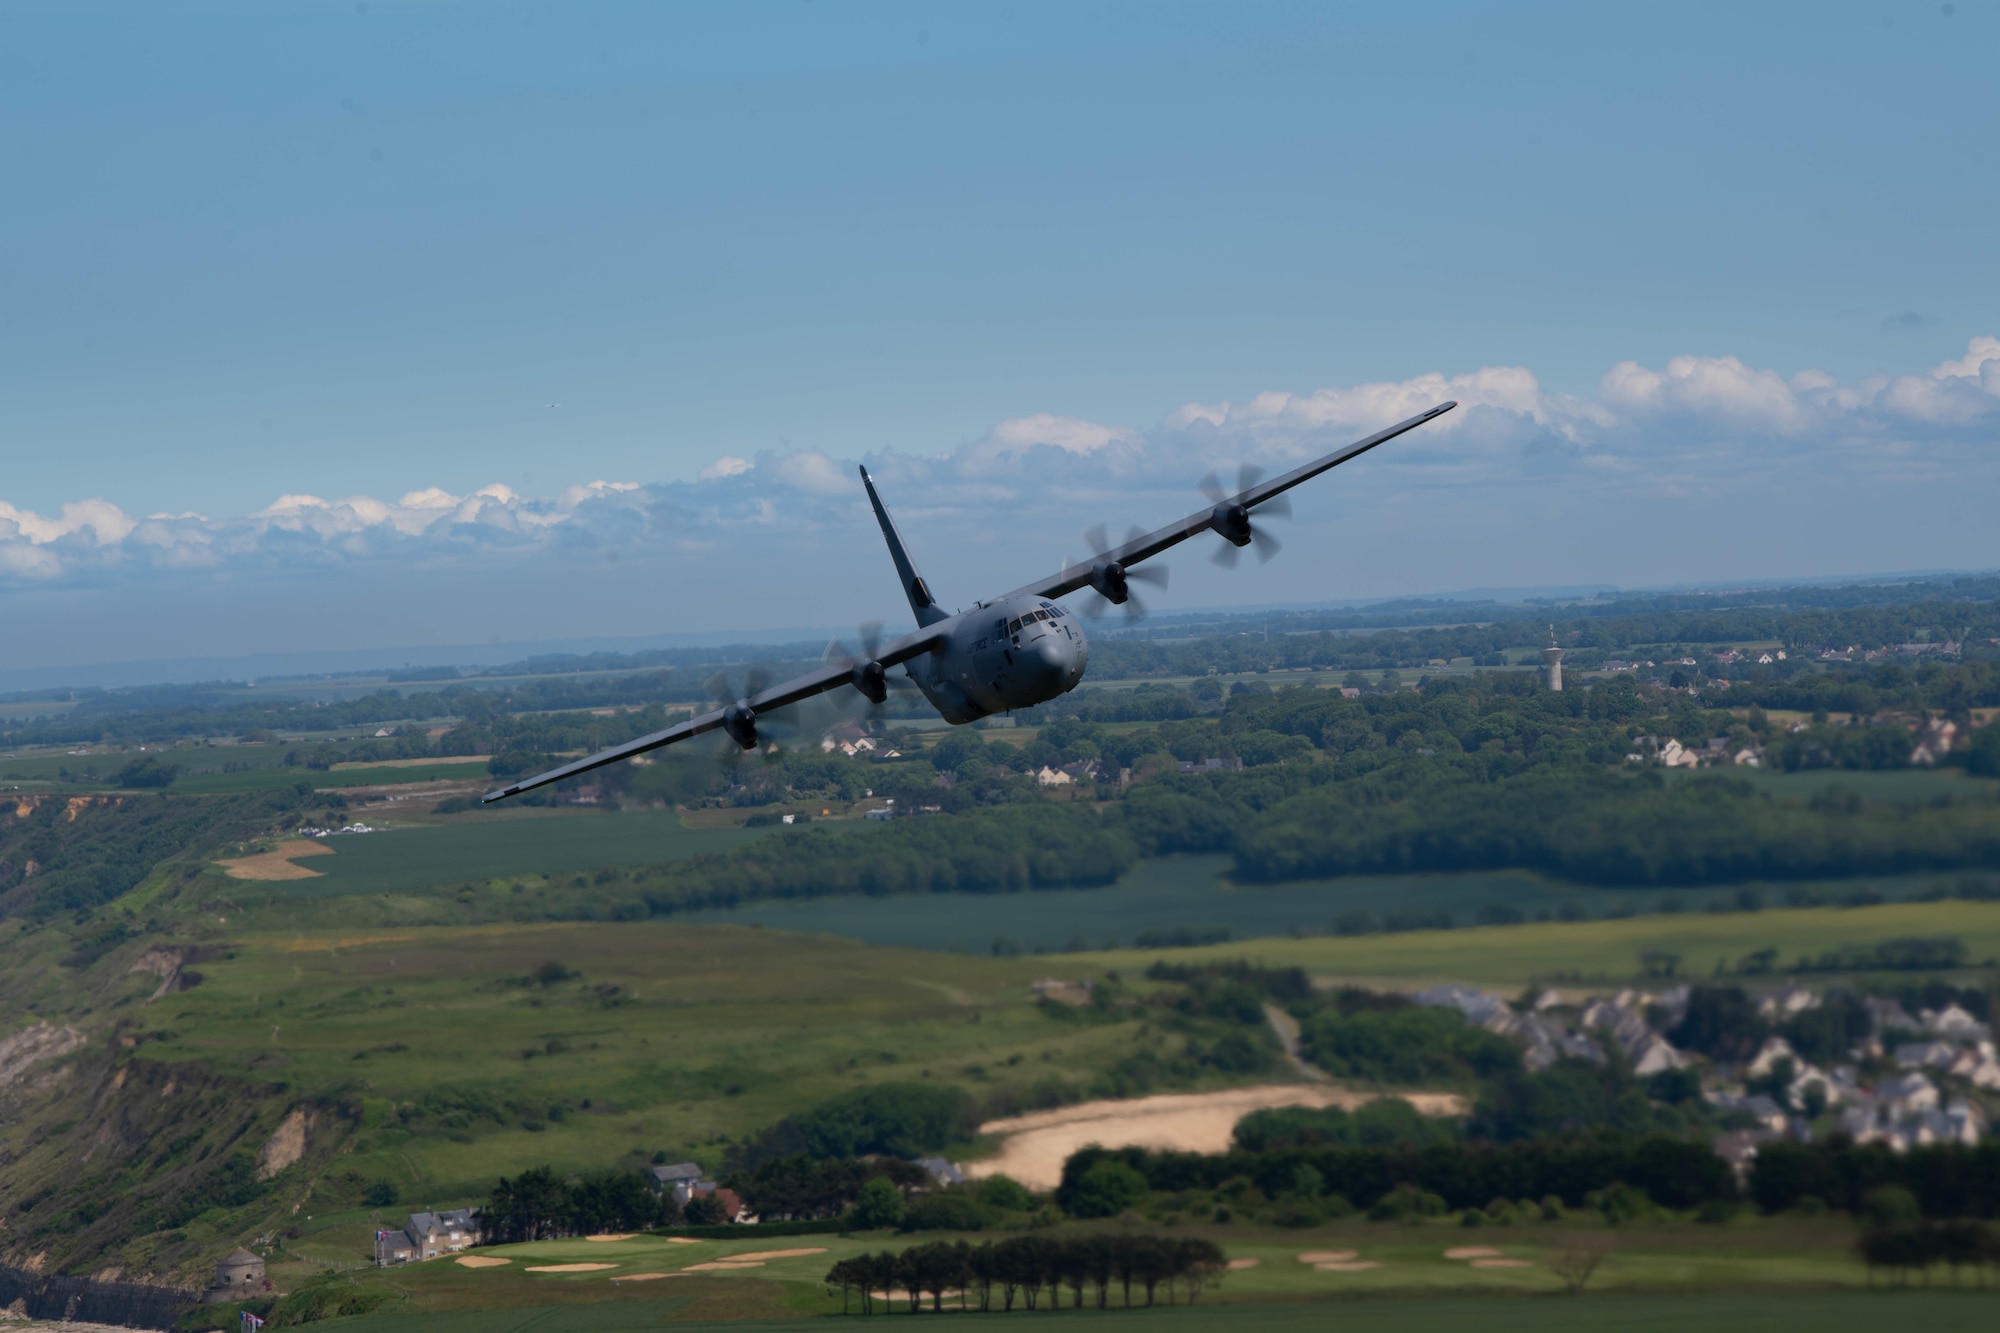 C-130J Super Hercules aircraft assigned to Ramstein Air Base, Germany, fly over France in remembrance of D-Day June 6, 2021.